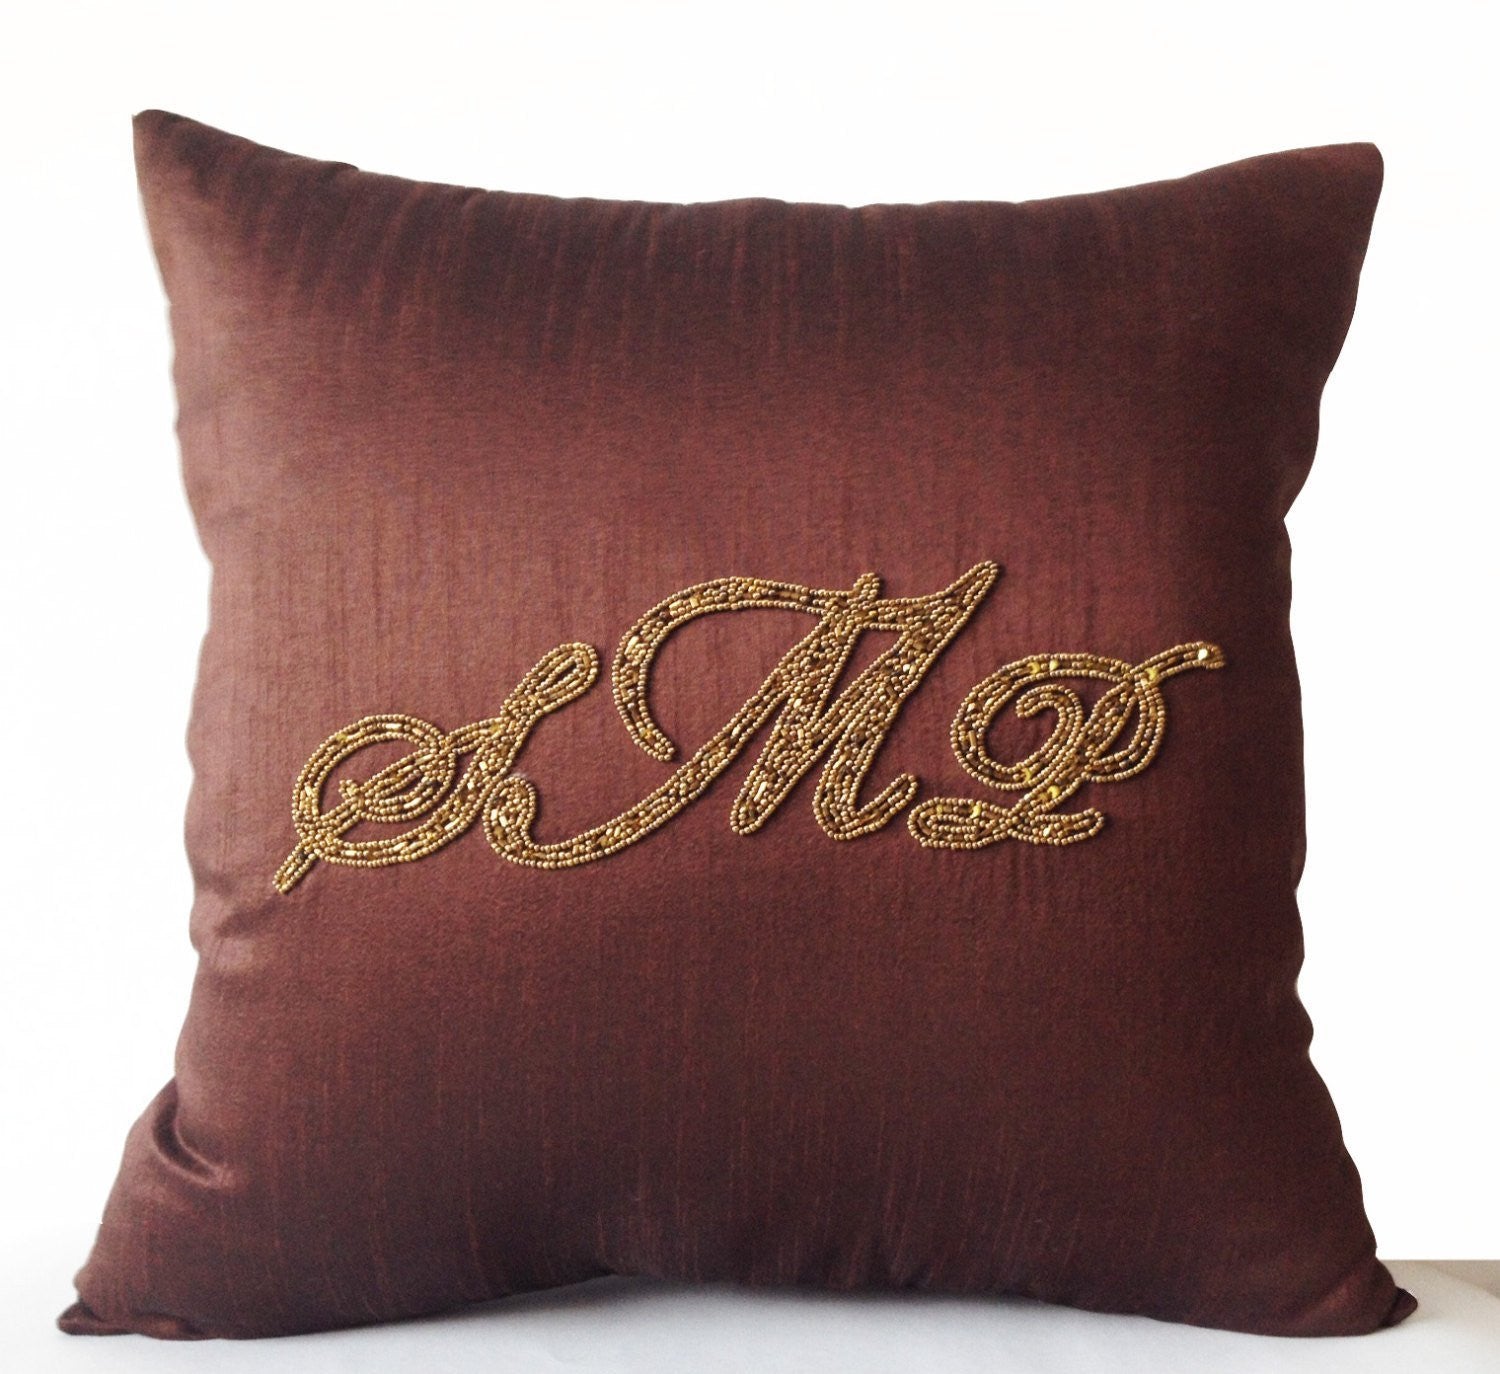 Handmade, customized monogrammed brown throw pillow covers with embroidery